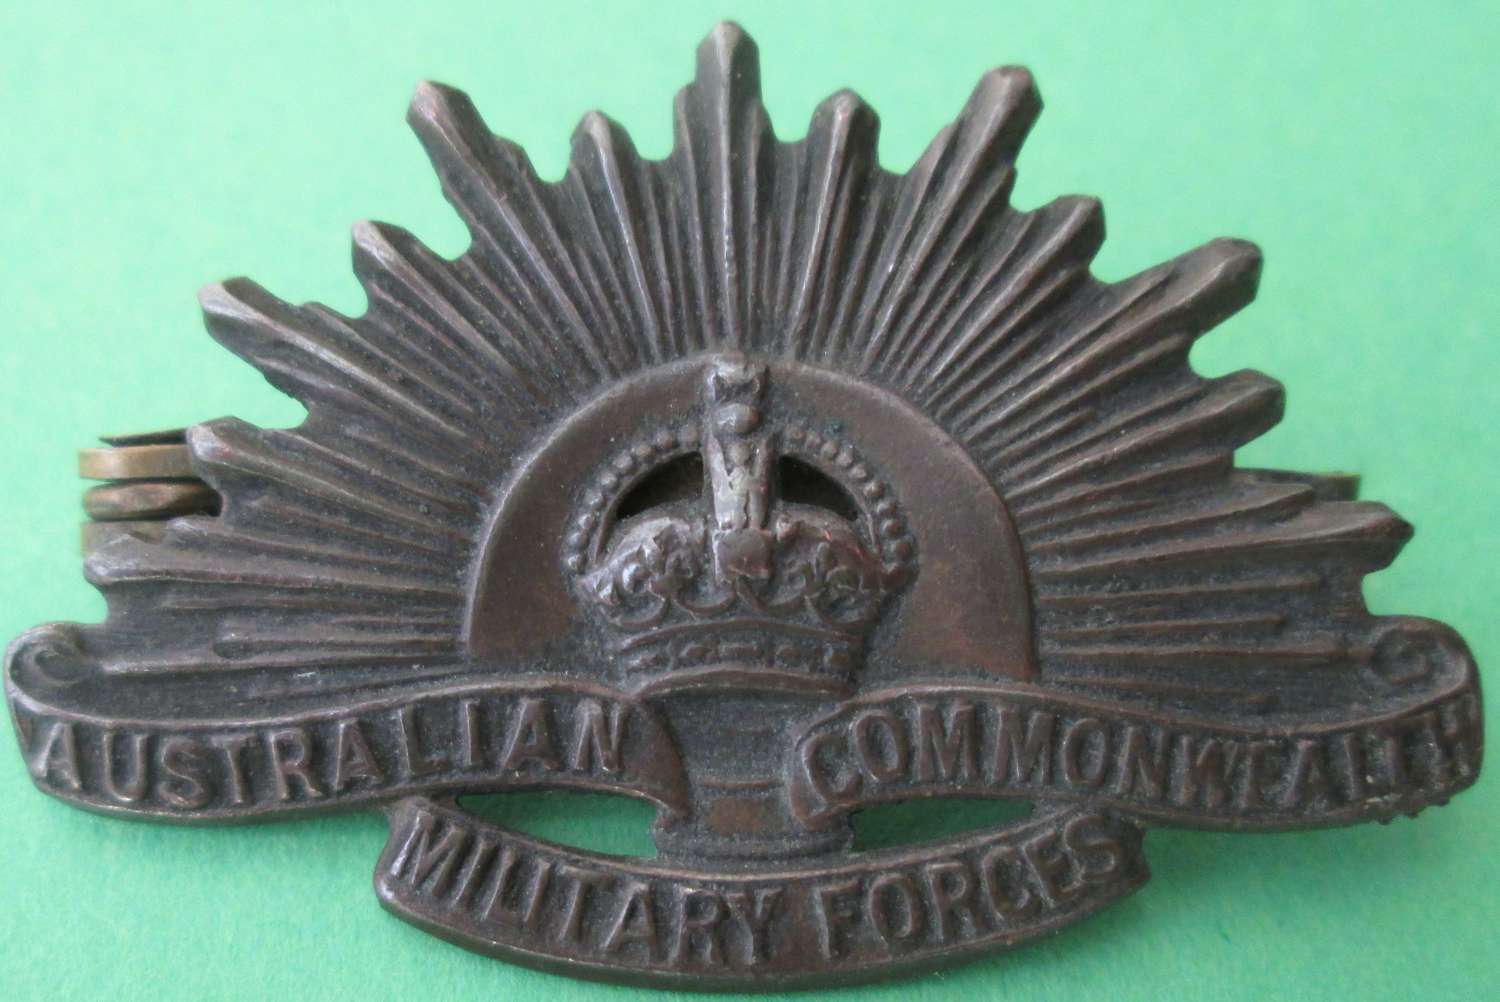 An Australian commonwealth millitary forces badge